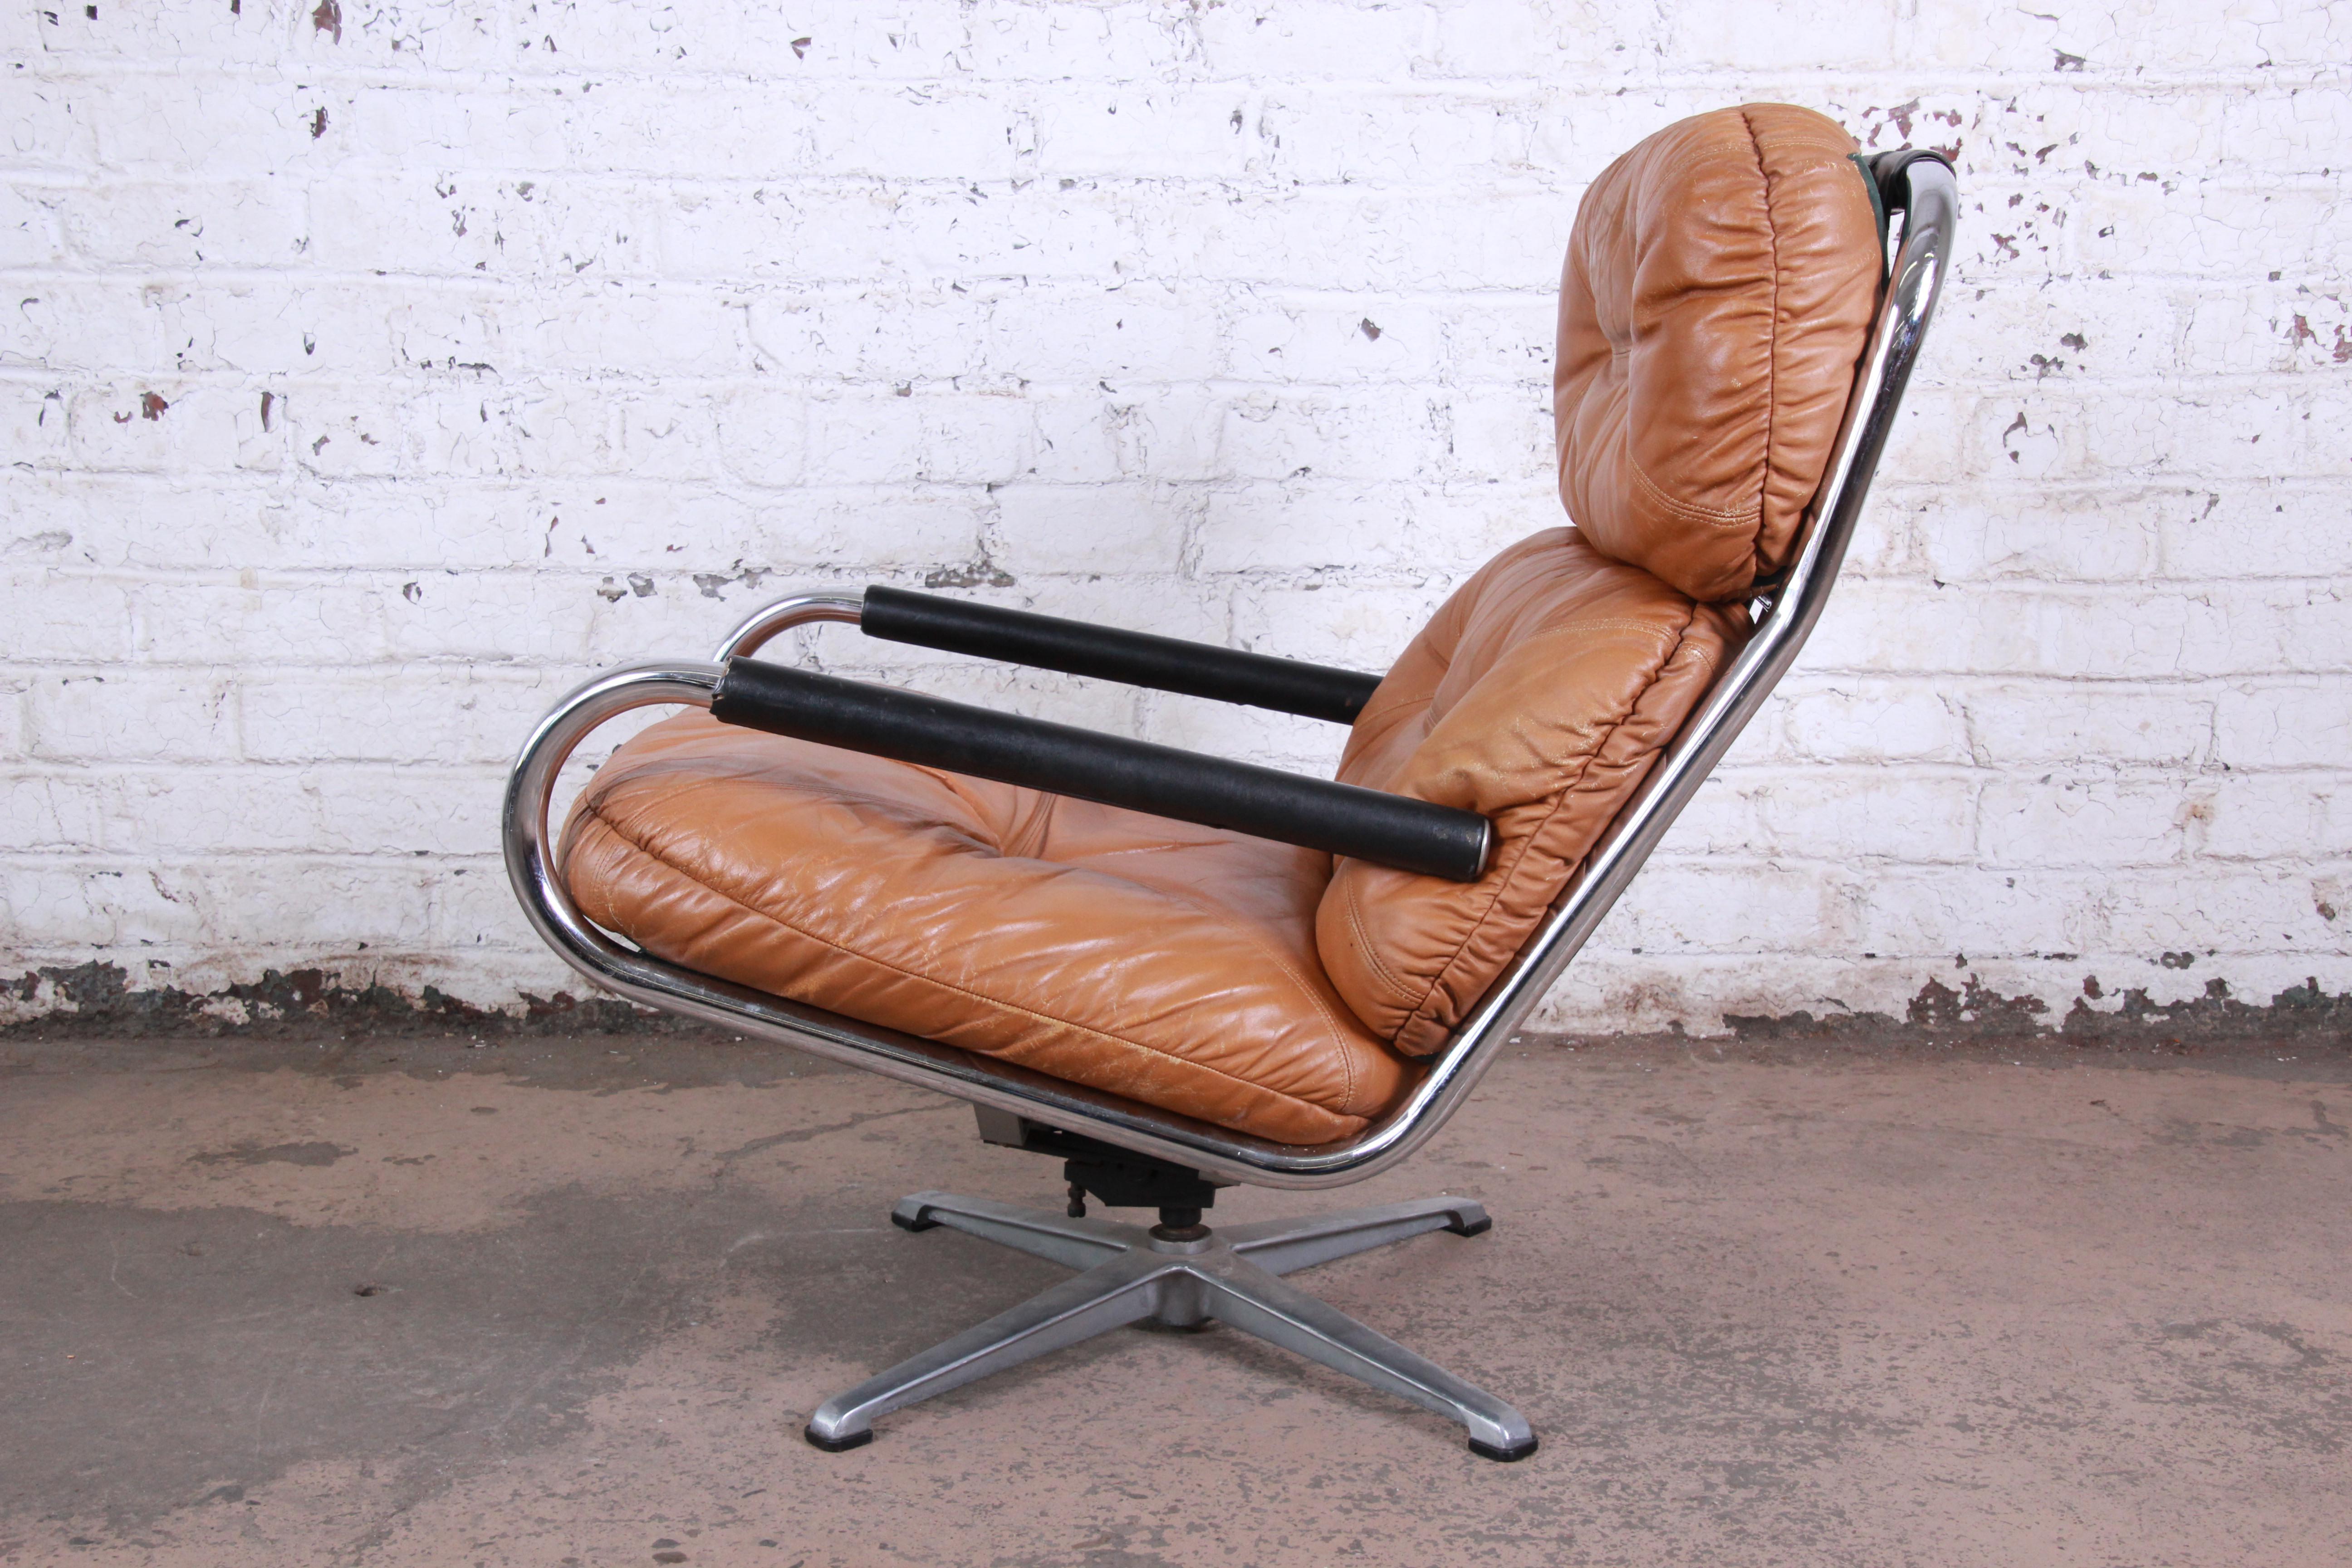 A gorgeous mid-century modern chrome and leather lounge chair designed for Directional. The chair features a polished chrome frame and beautiful tufted brown leather upholstery. An extremely comfortable chair and a nice alternative to the Eames